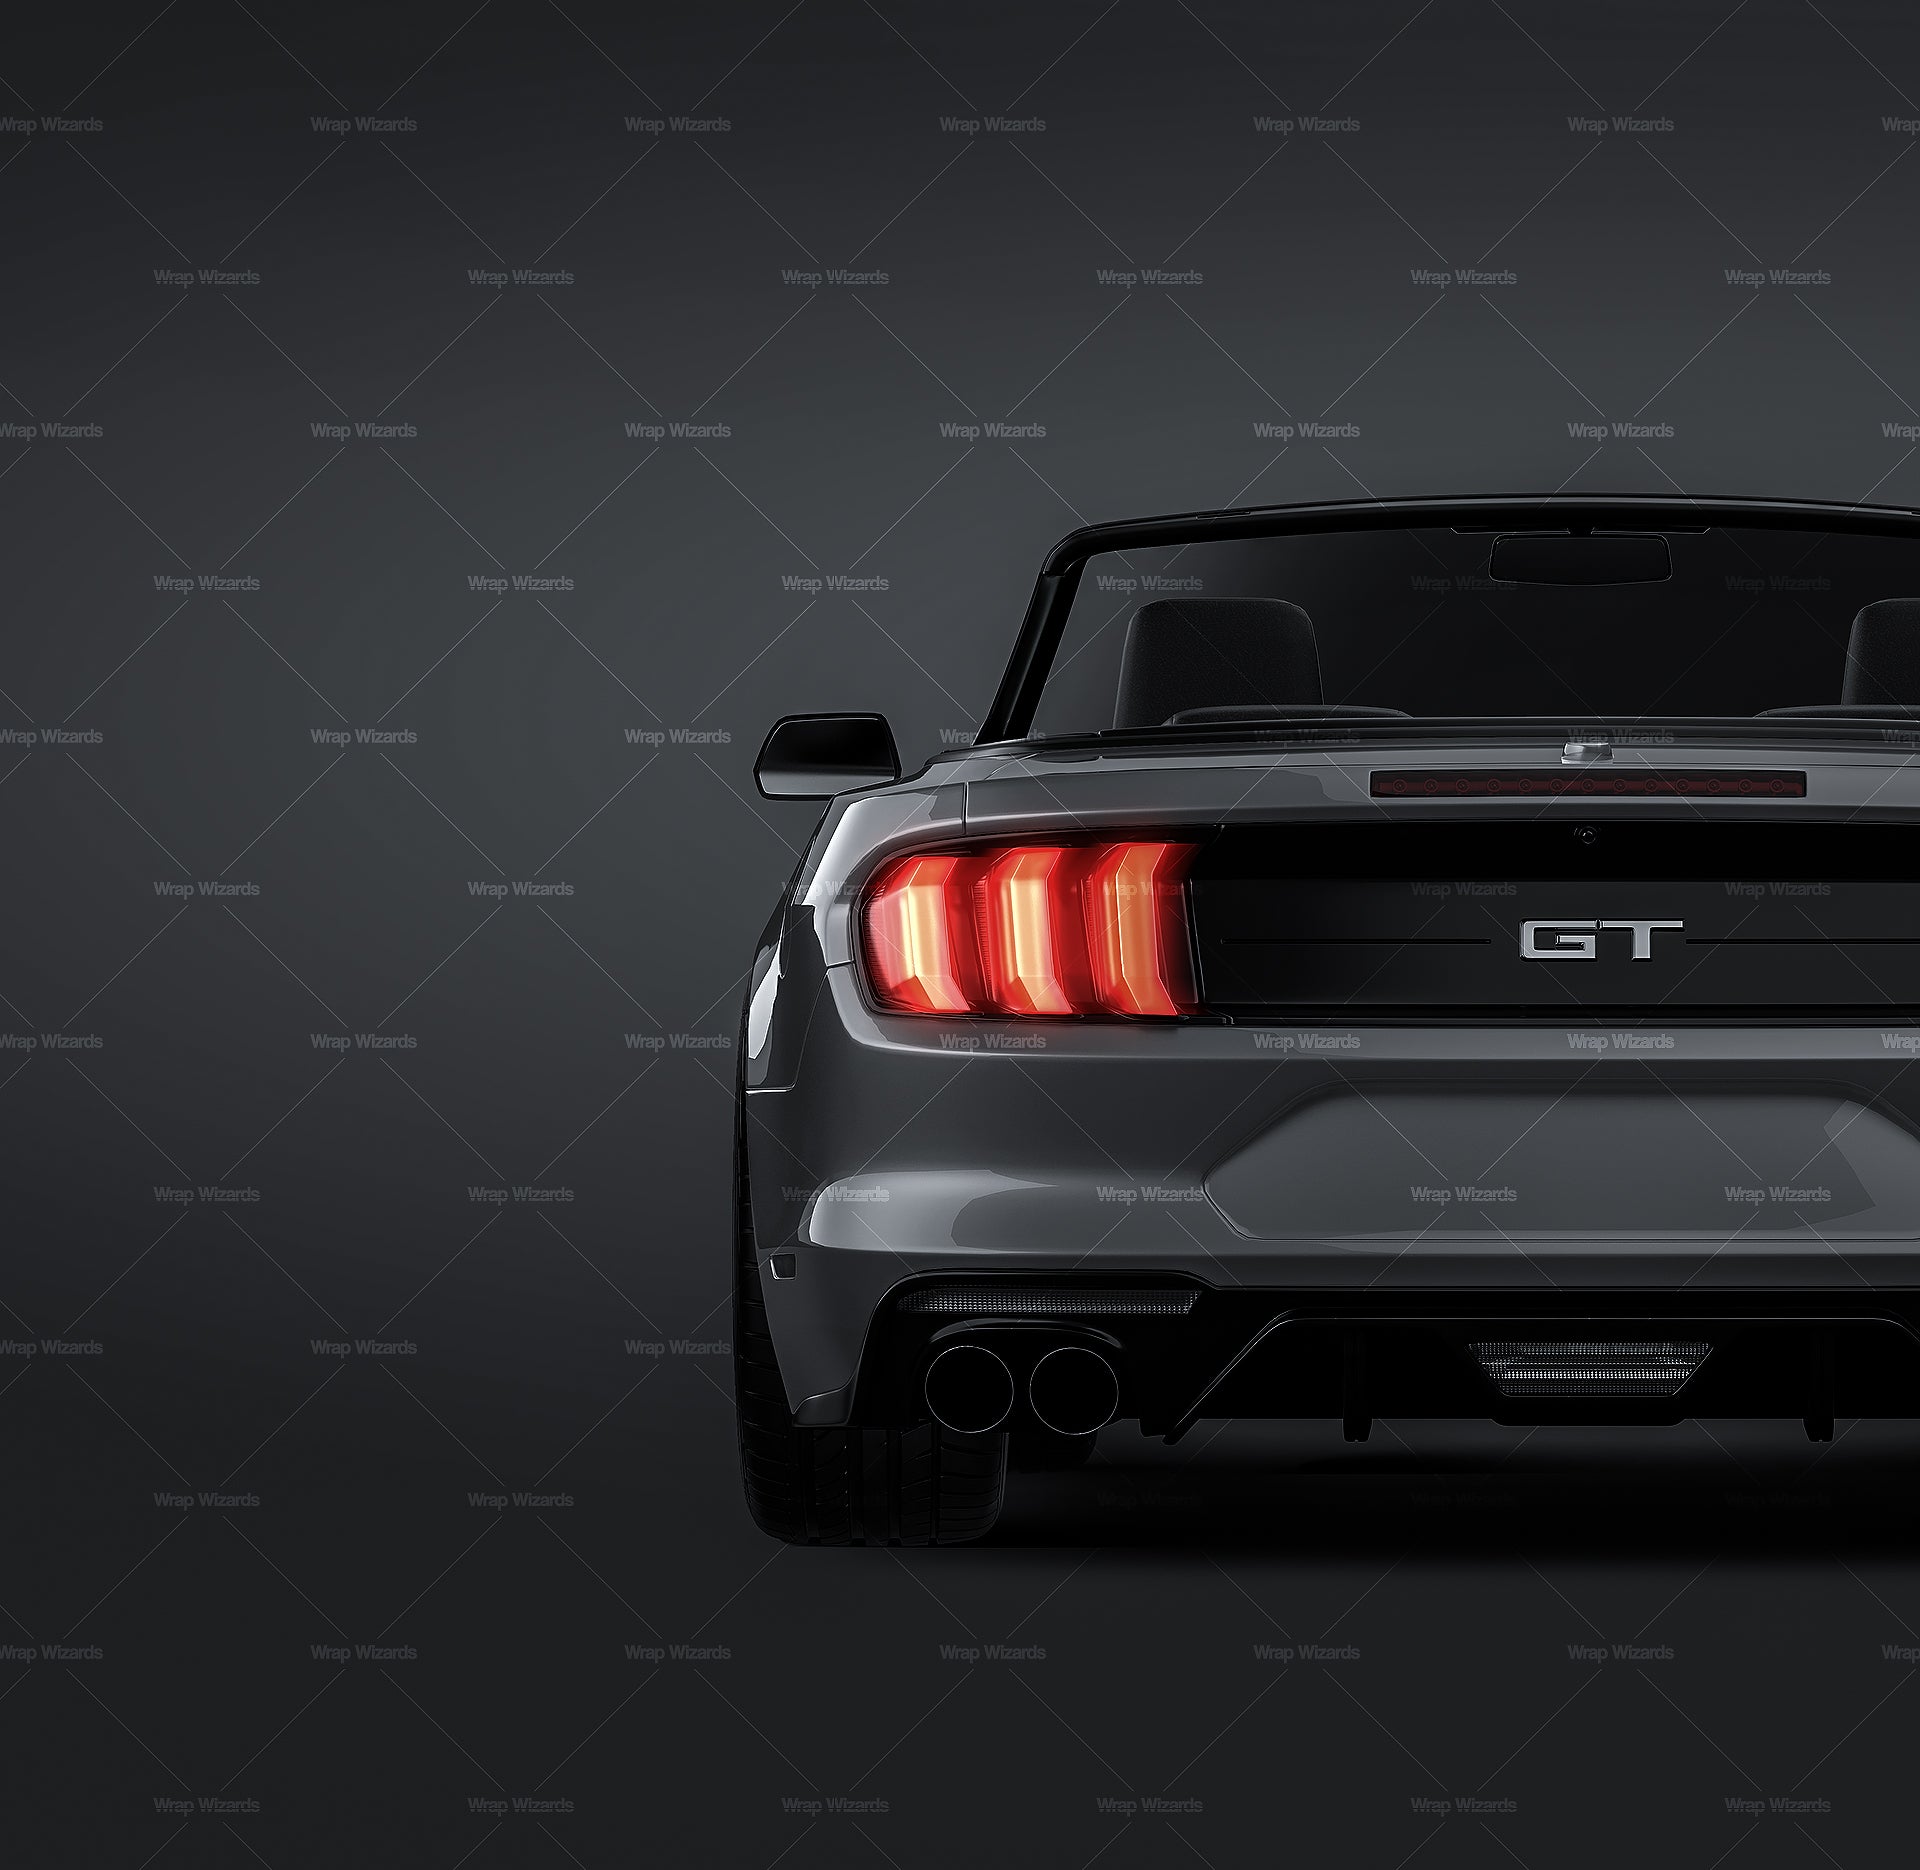 Ford Mustang GT 2018 Convertible glossy finish - all sides Car Mockup Template.psd